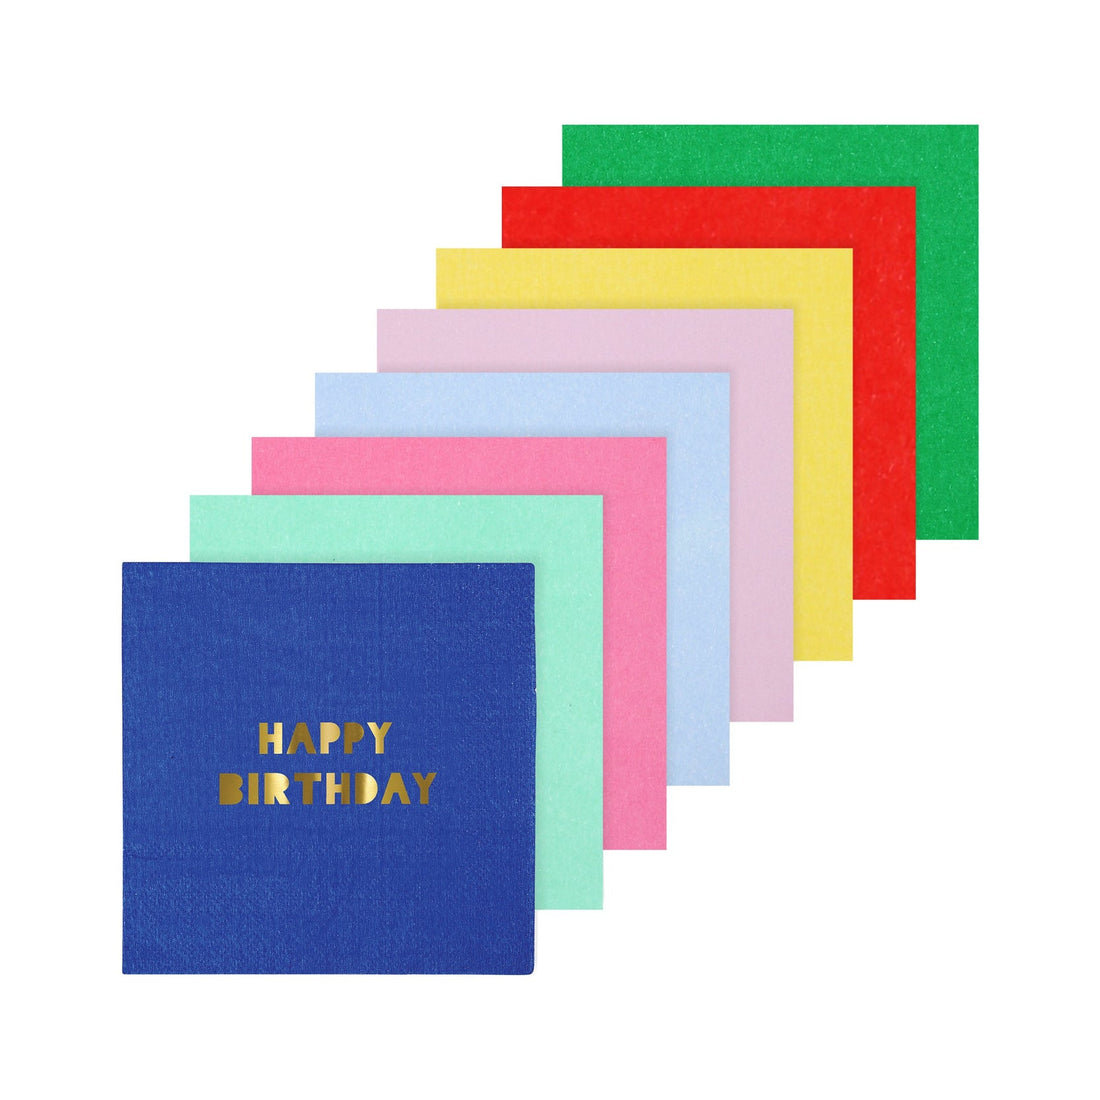 A collection of colorful greeting cards with one in the foreground featuring a &quot;happy birthday&quot; message, arranged as party table decoration using Meri Meri&